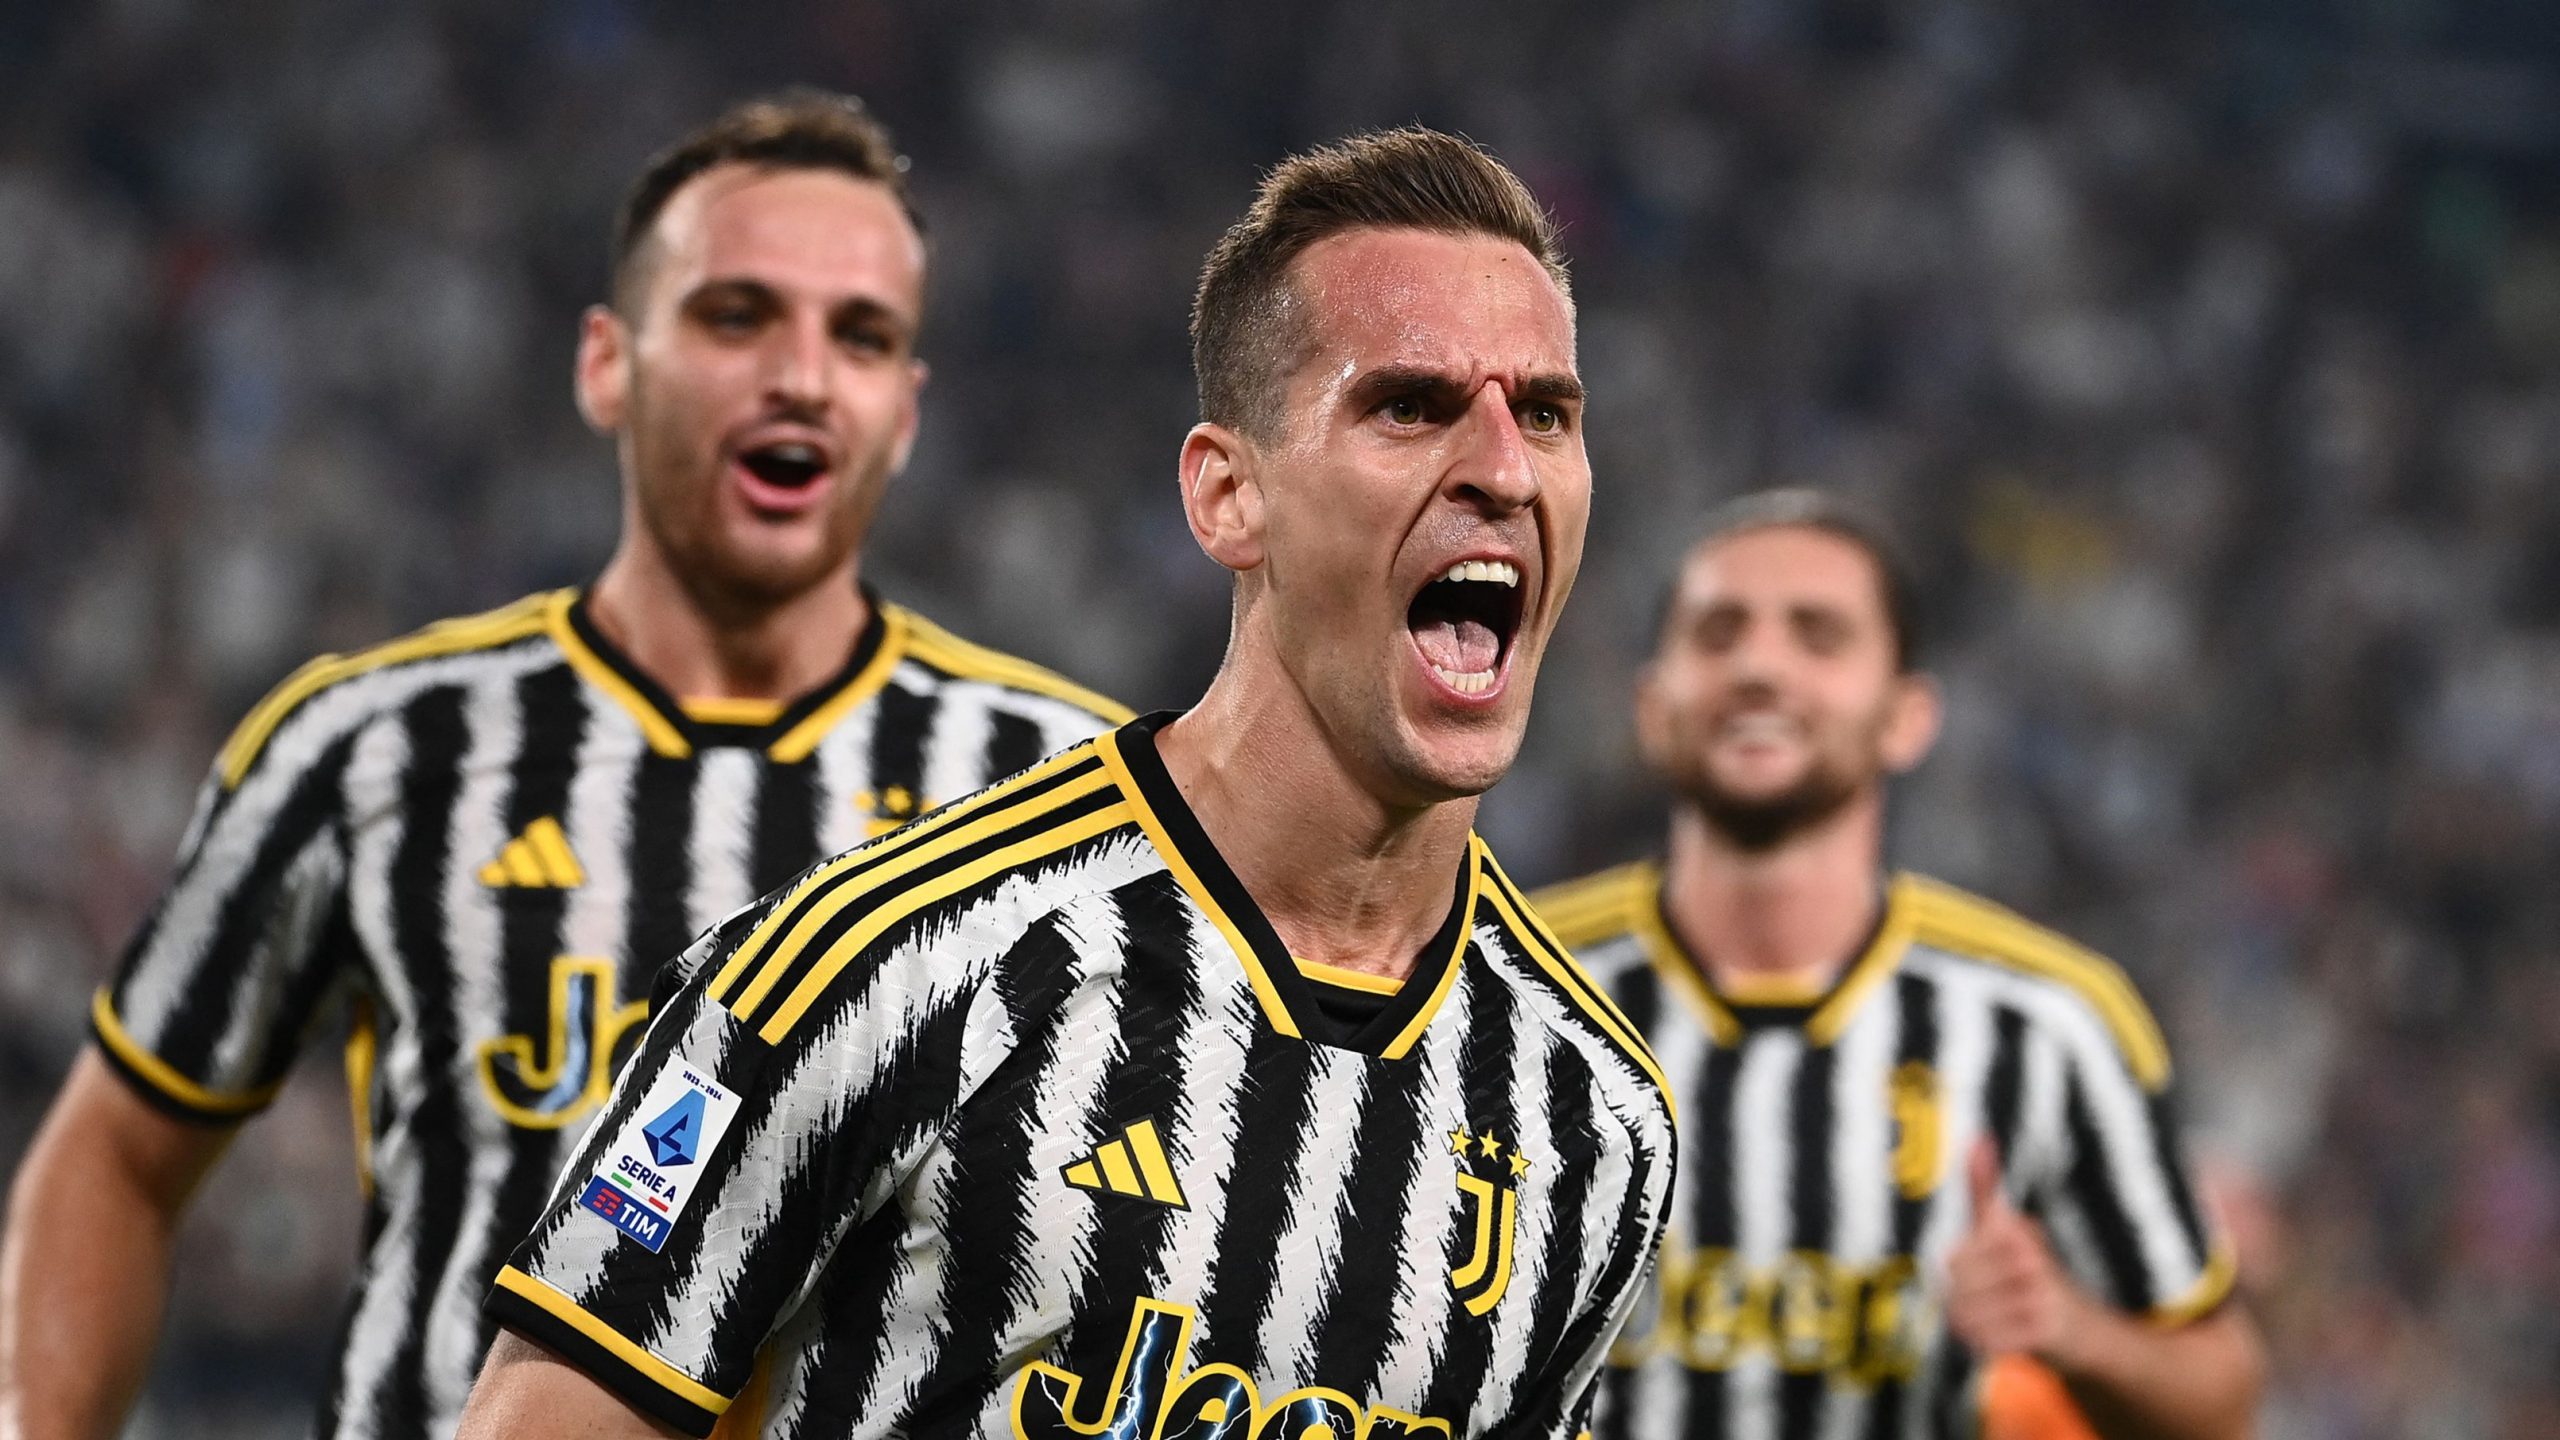 Arkadiusz Milik reflects on Juventus win and absence from starting XI